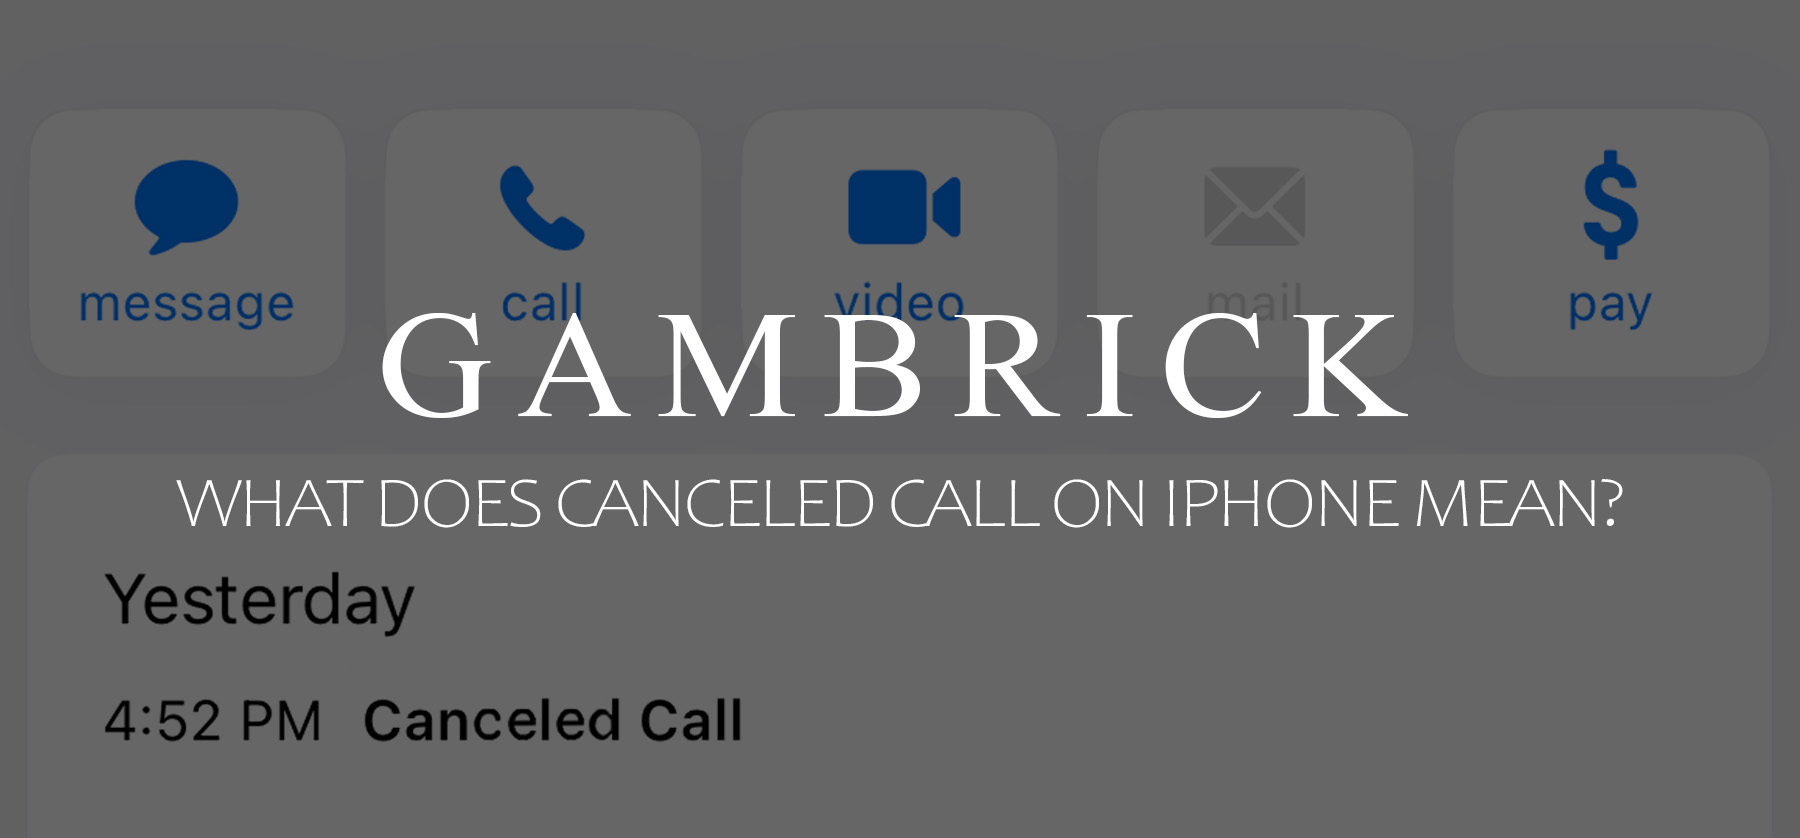 what does canceled call on iPhone mean banner 1.0